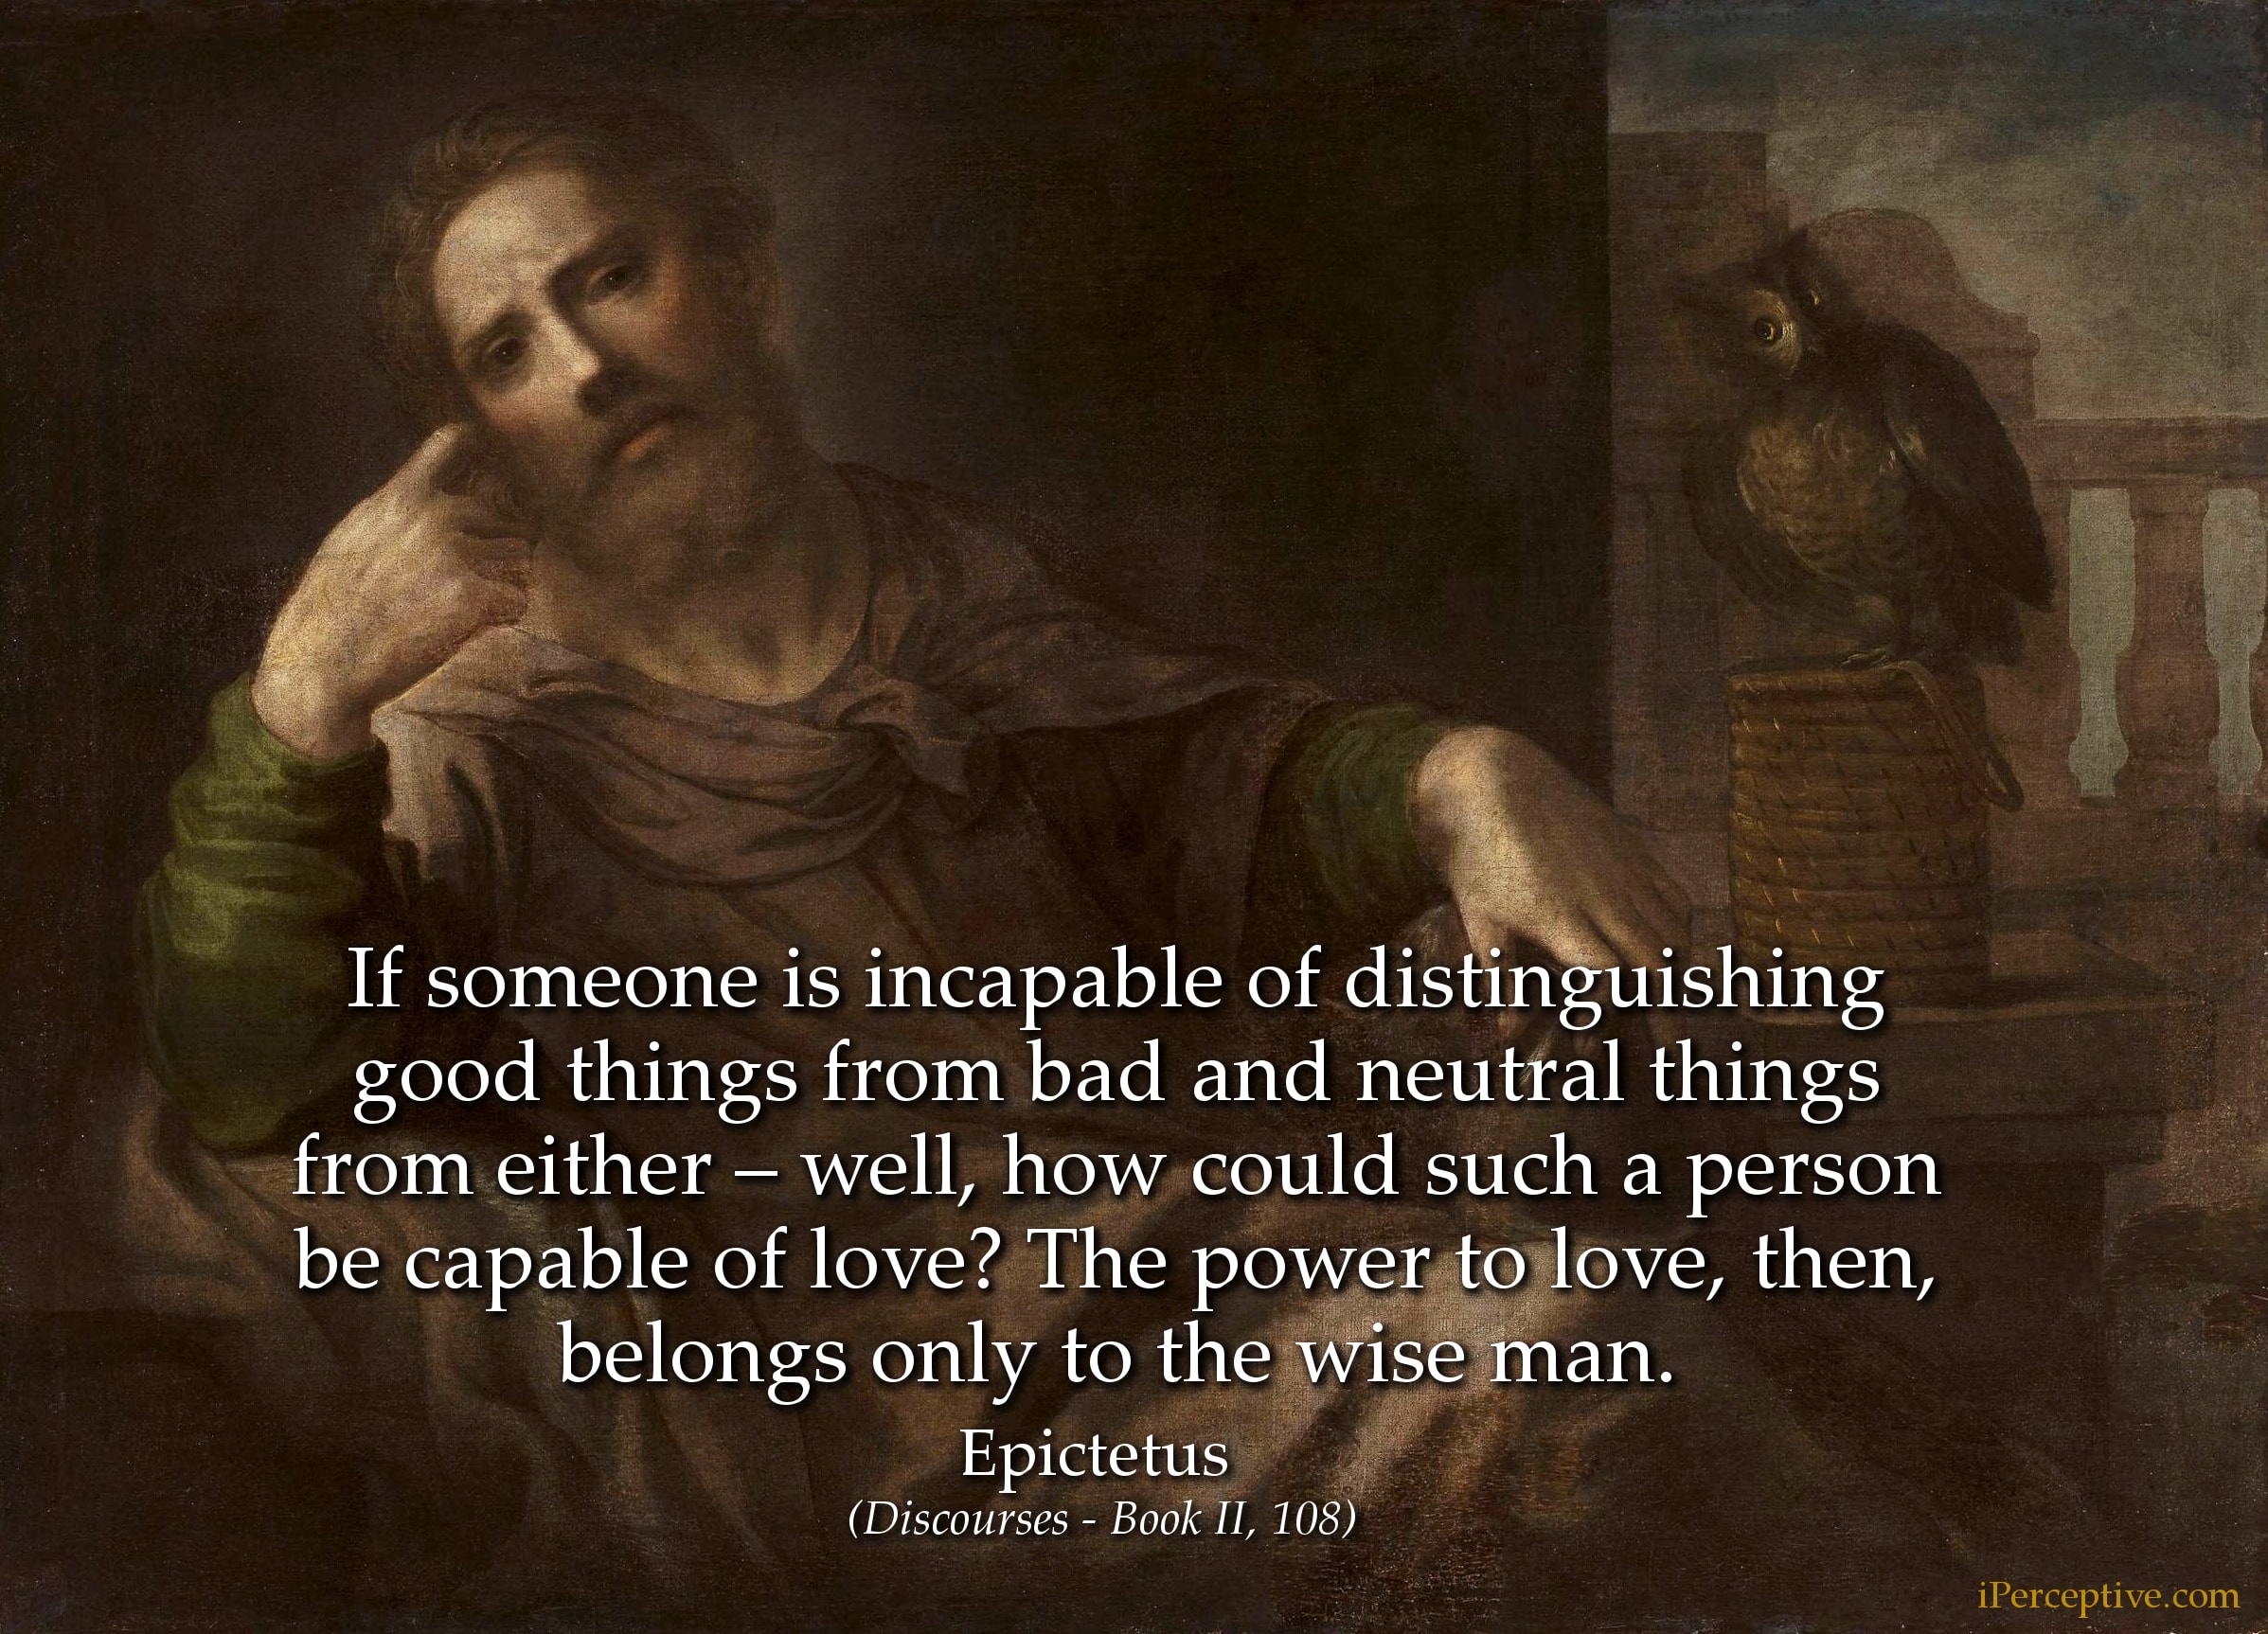 Epictetus Stoic Quote On Love If Someone Is Incapable Of Distinguishing Good Things From